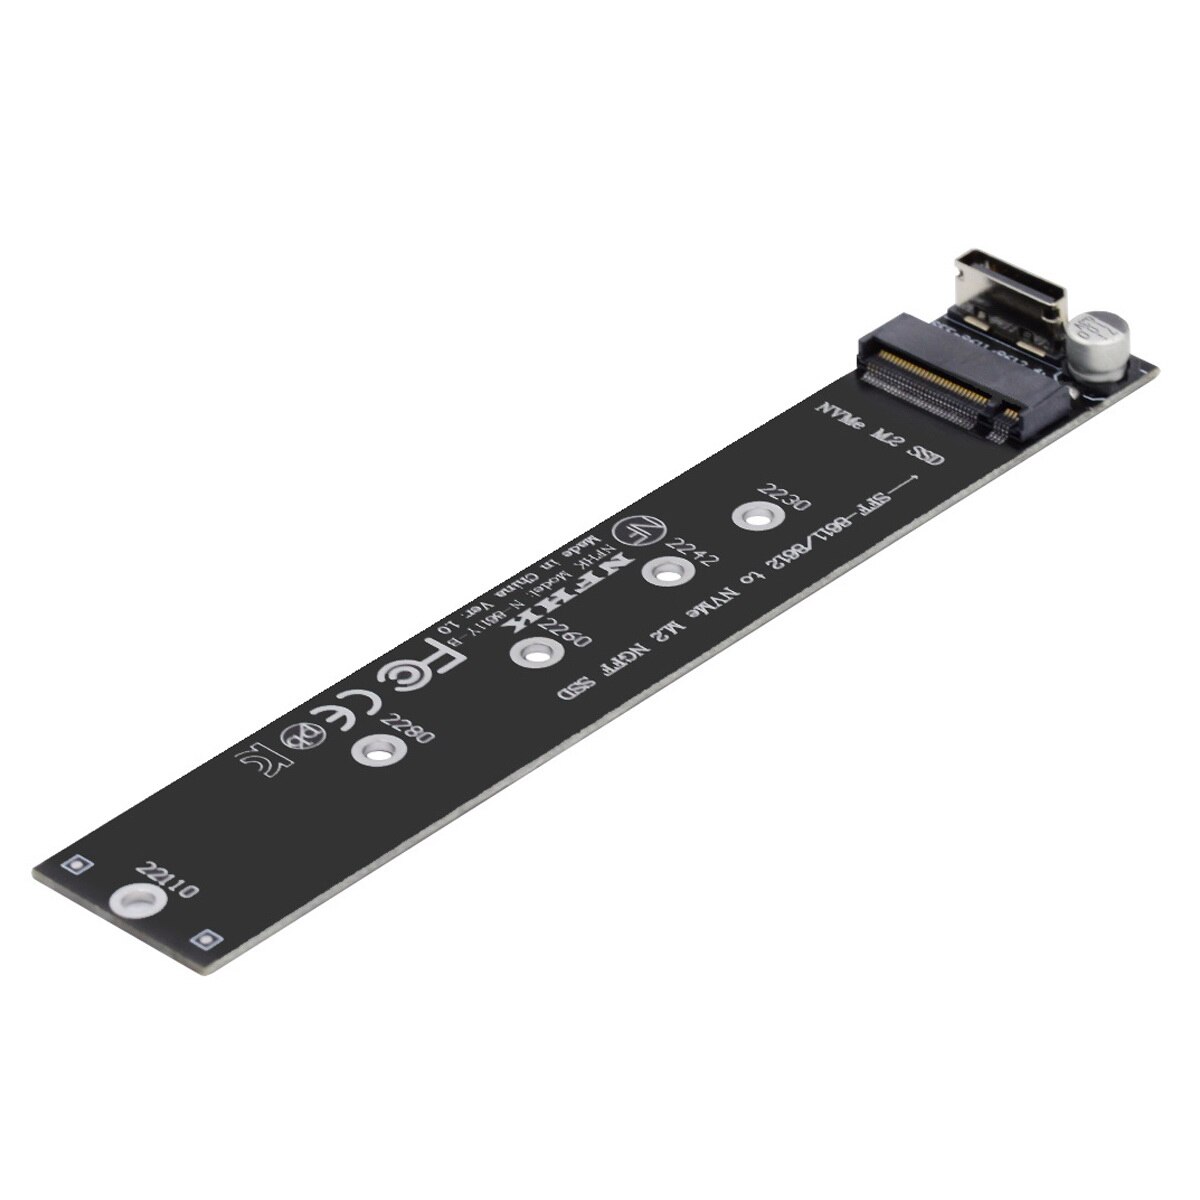 Chenyang NVME PCIe SSD 2280 22110mm Oculink SFF-8612 SFF-8611 to Adapter for Mainboard M.2 Kit NGFF M-Key to